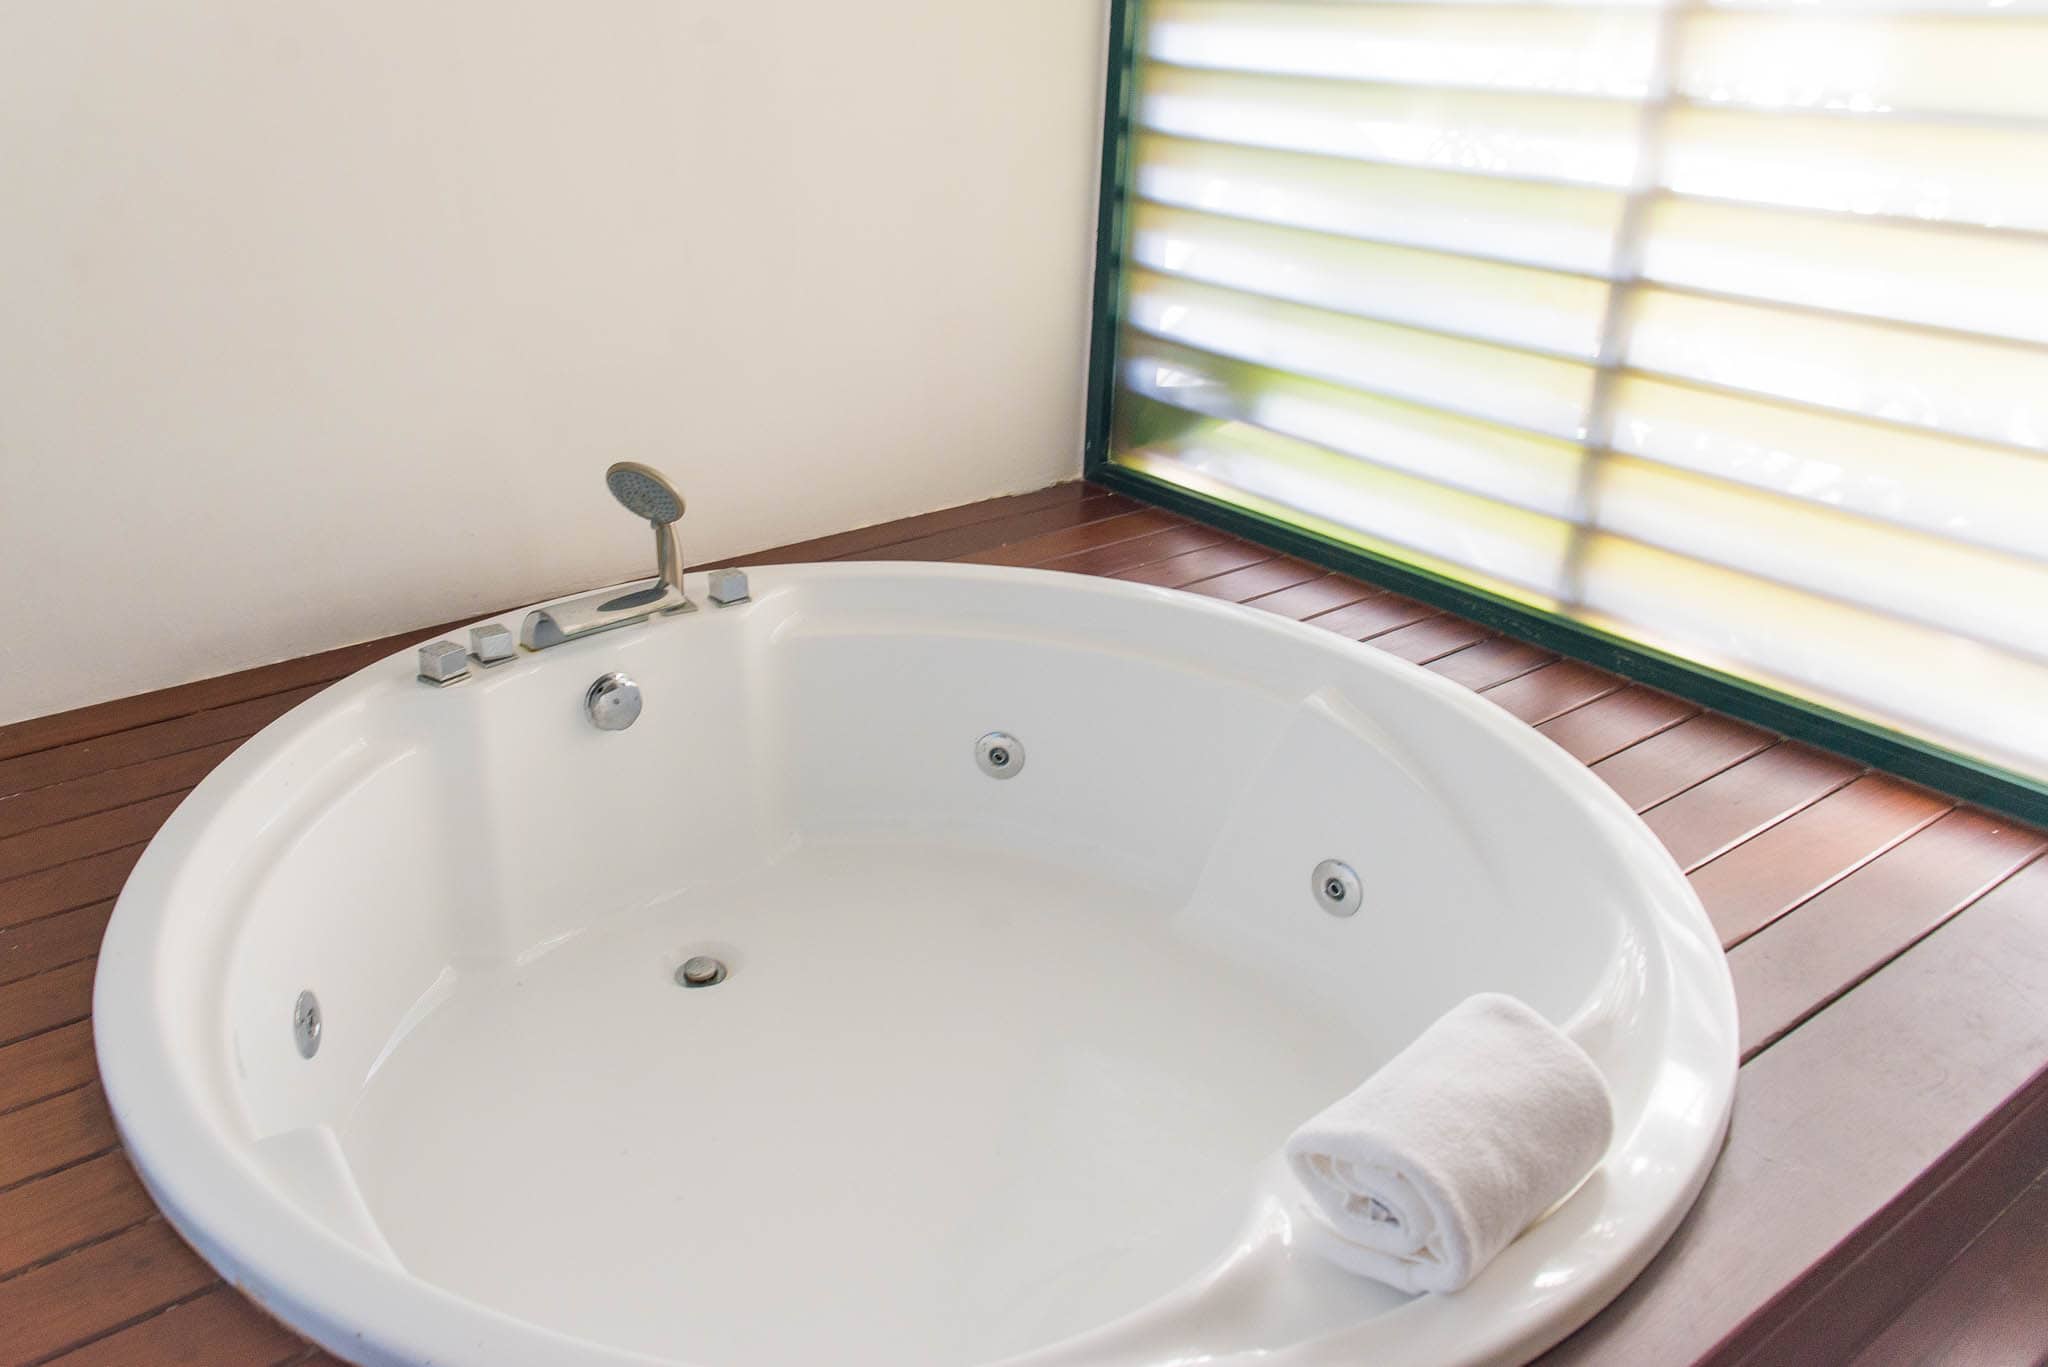 And did I mention that almost all rooms have jacuzzis for lounging all hours of the day?